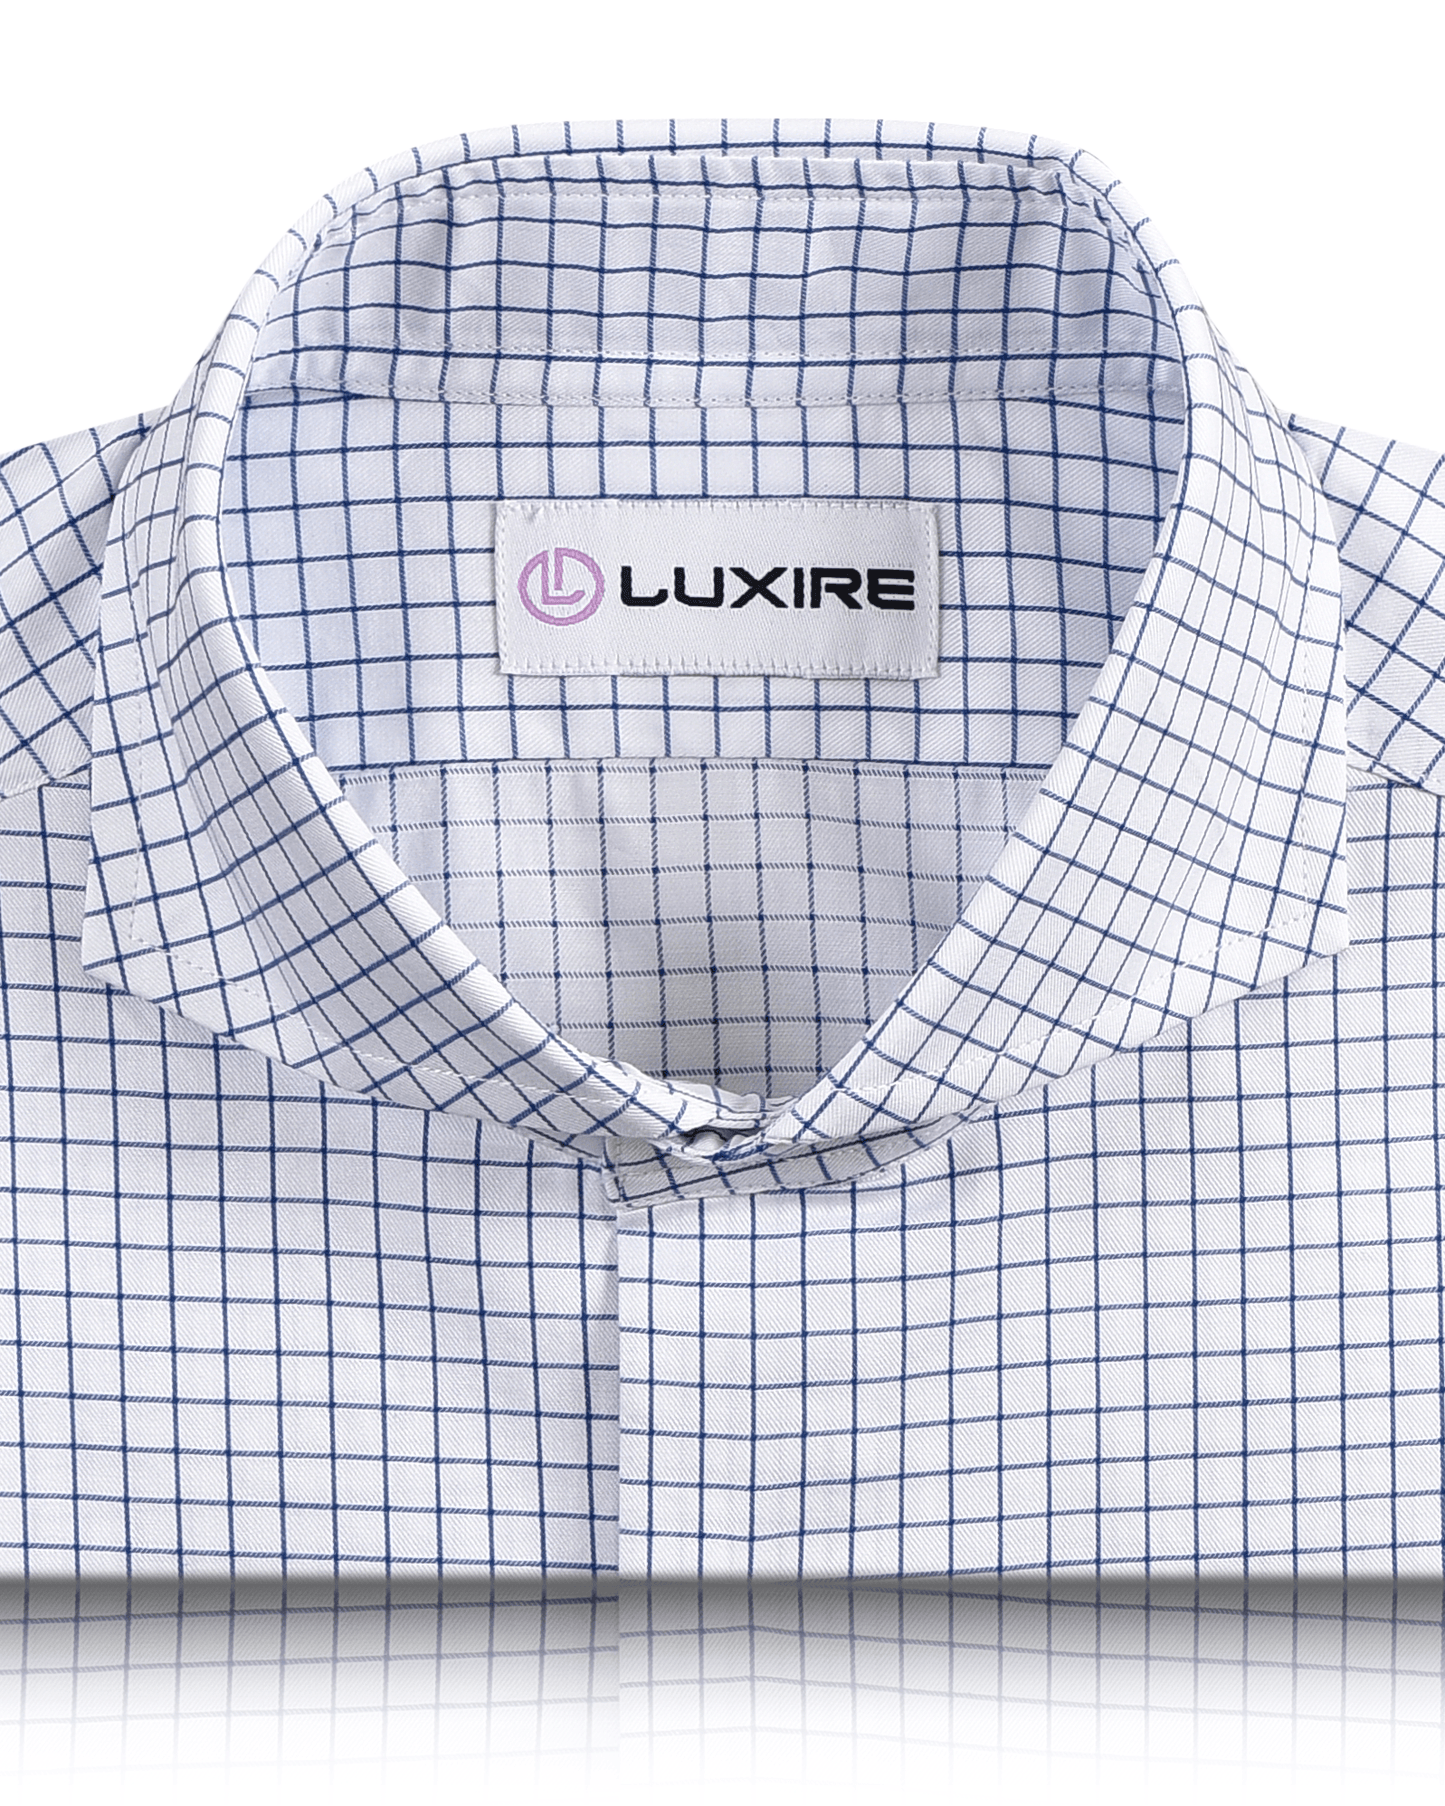 Front close view of custom check shirts for men by Luxire monti blue graph twill